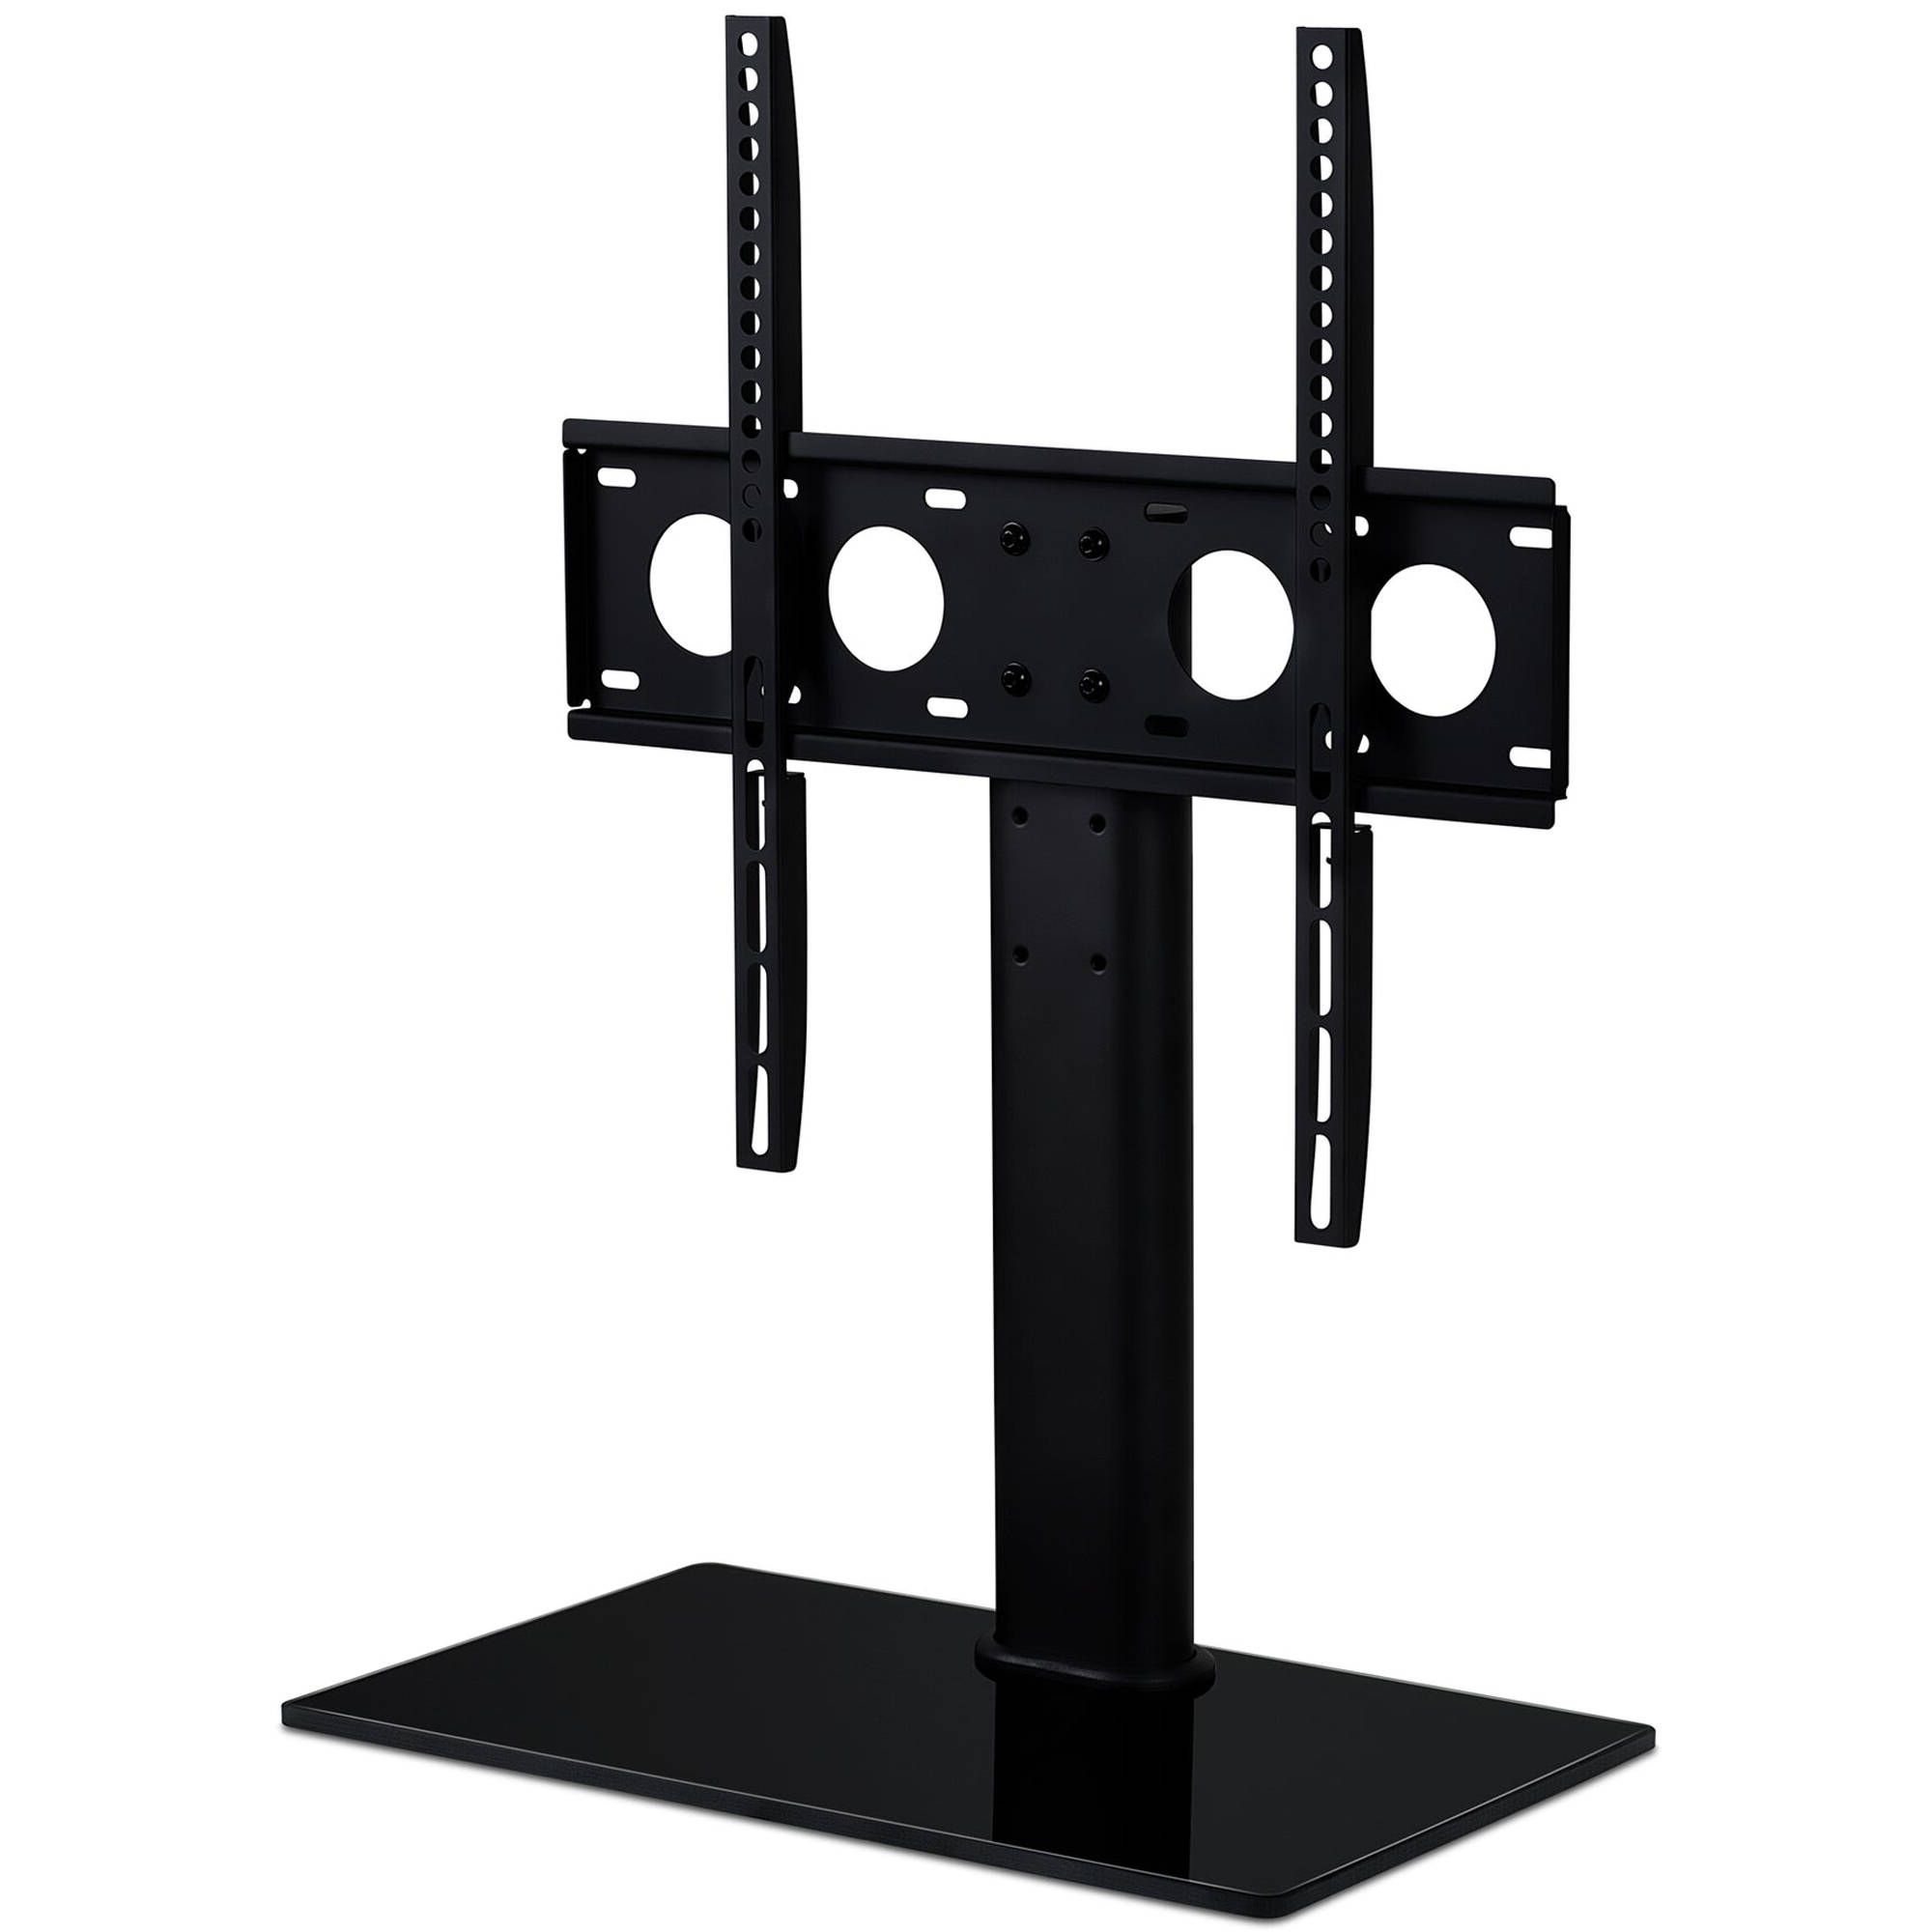 Mount It! Universal Tabletop Tv Stand Mi 847 B&h Photo Video Throughout Universal Tabletop Tv Stands (View 15 of 20)